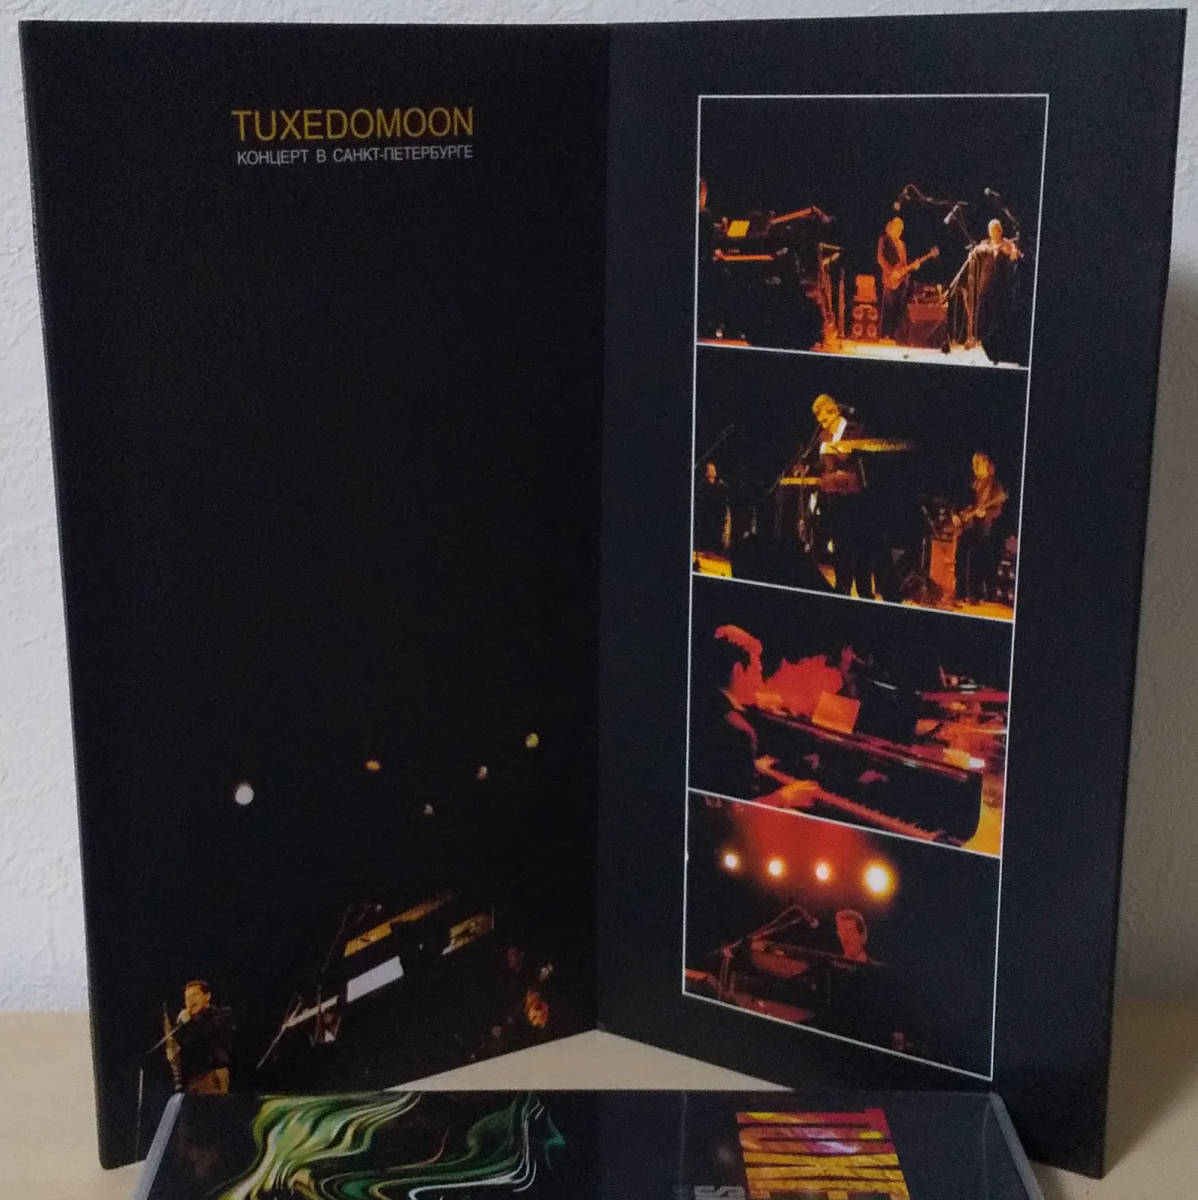 Tuxedomoon - Live In St.Petersburg Russia盤 2xCD Neo Acustica - NEOCD 01 Limited Edition 2002年_画像5